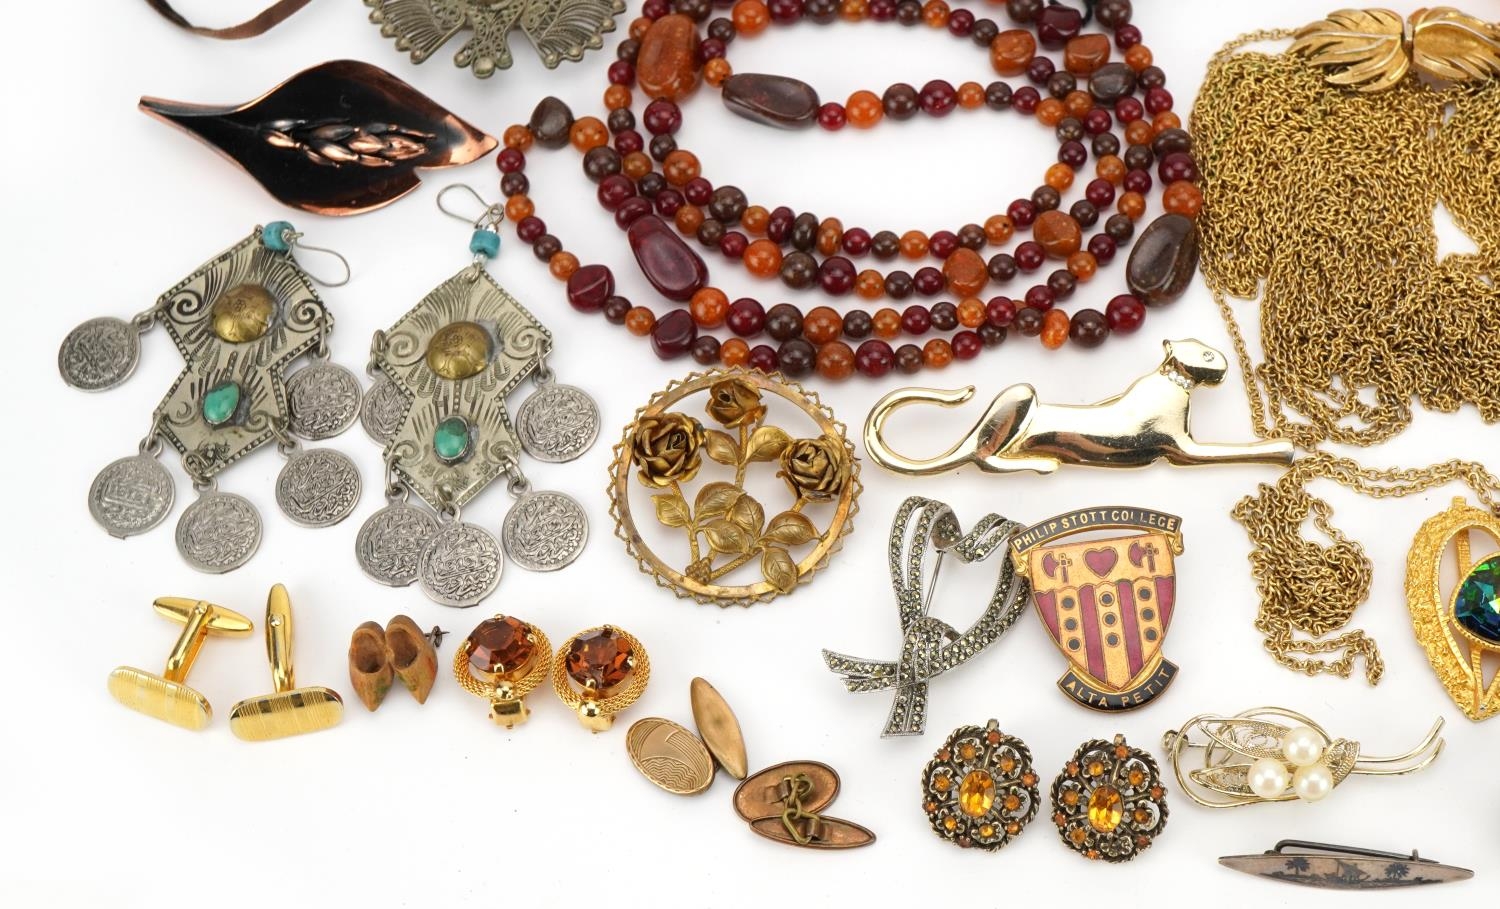 Vintage and later costume jewellery including a Trifari necklace, amber coloured bead necklaces, - Image 4 of 5